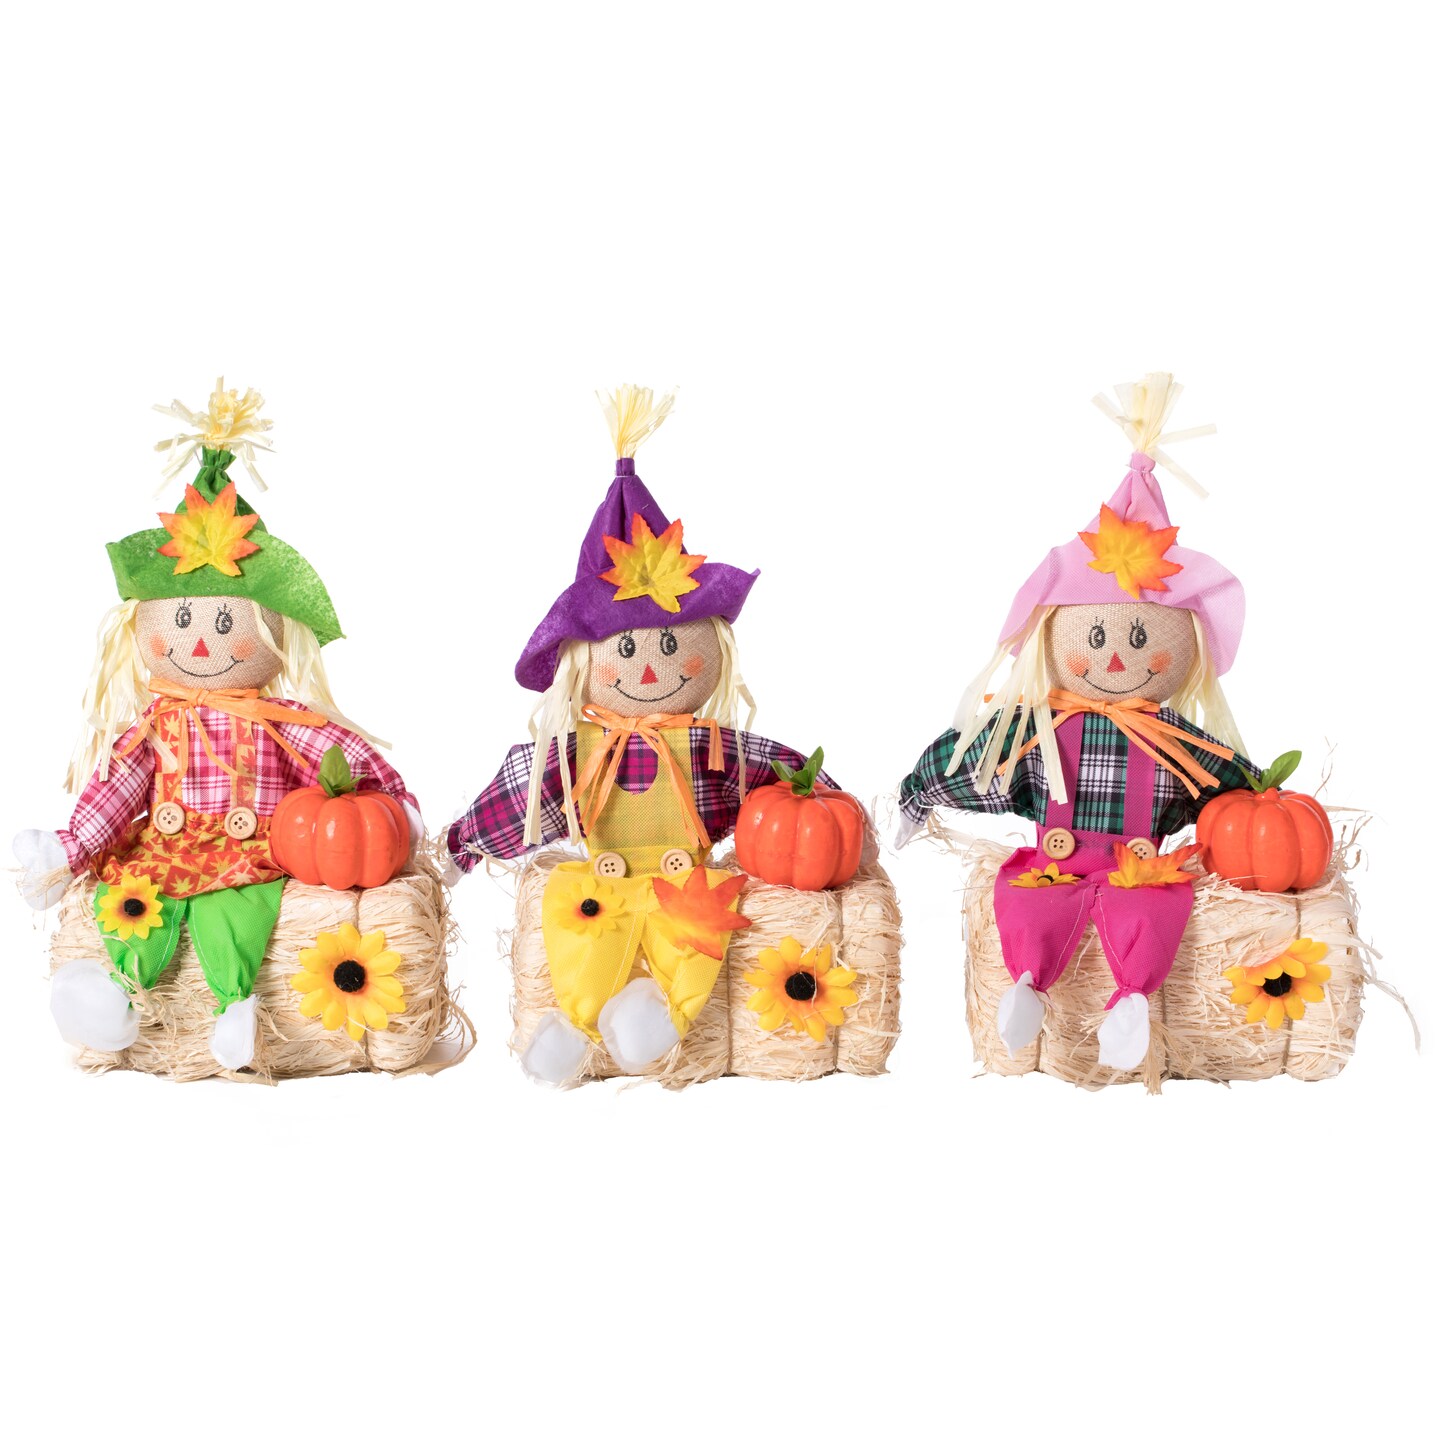 Gardenised 18 Inch Sitting on Straw and Hay Bales Multicolor Trio Scarecrows for Halloween, Fall and All Time Season Garden Decor, Perfect to Add a Festive Touch to Your Lawn